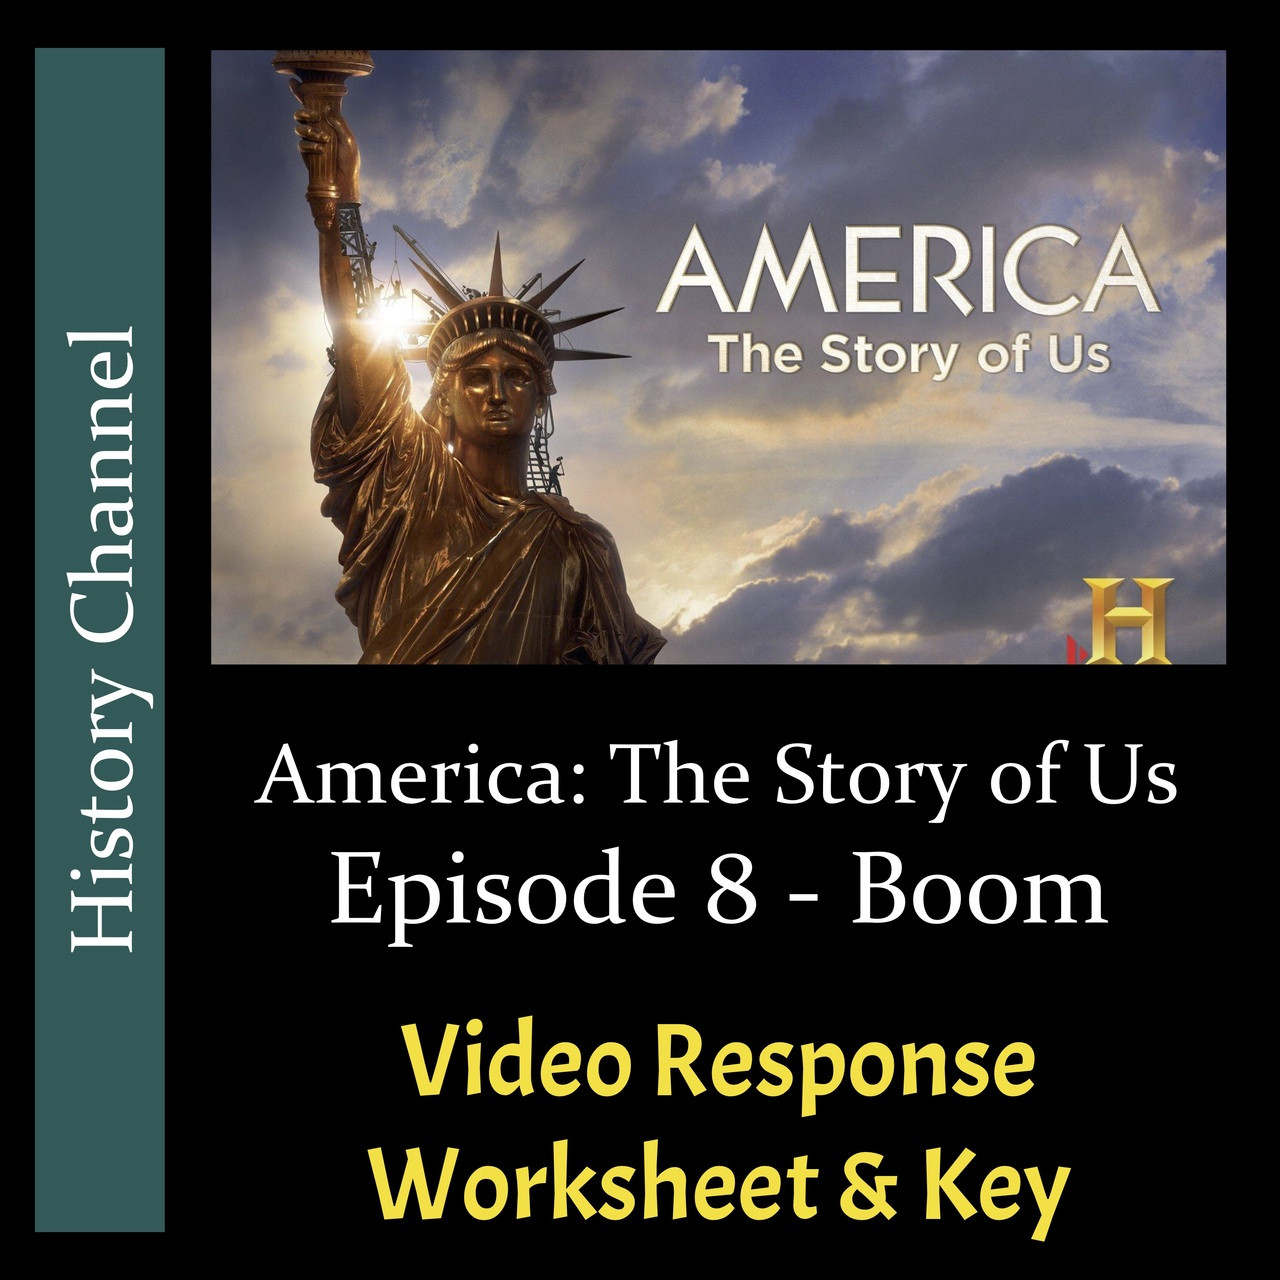 america-the-story-of-us-episode-8-boom-video-response-worksheet-key-editable-amped-up